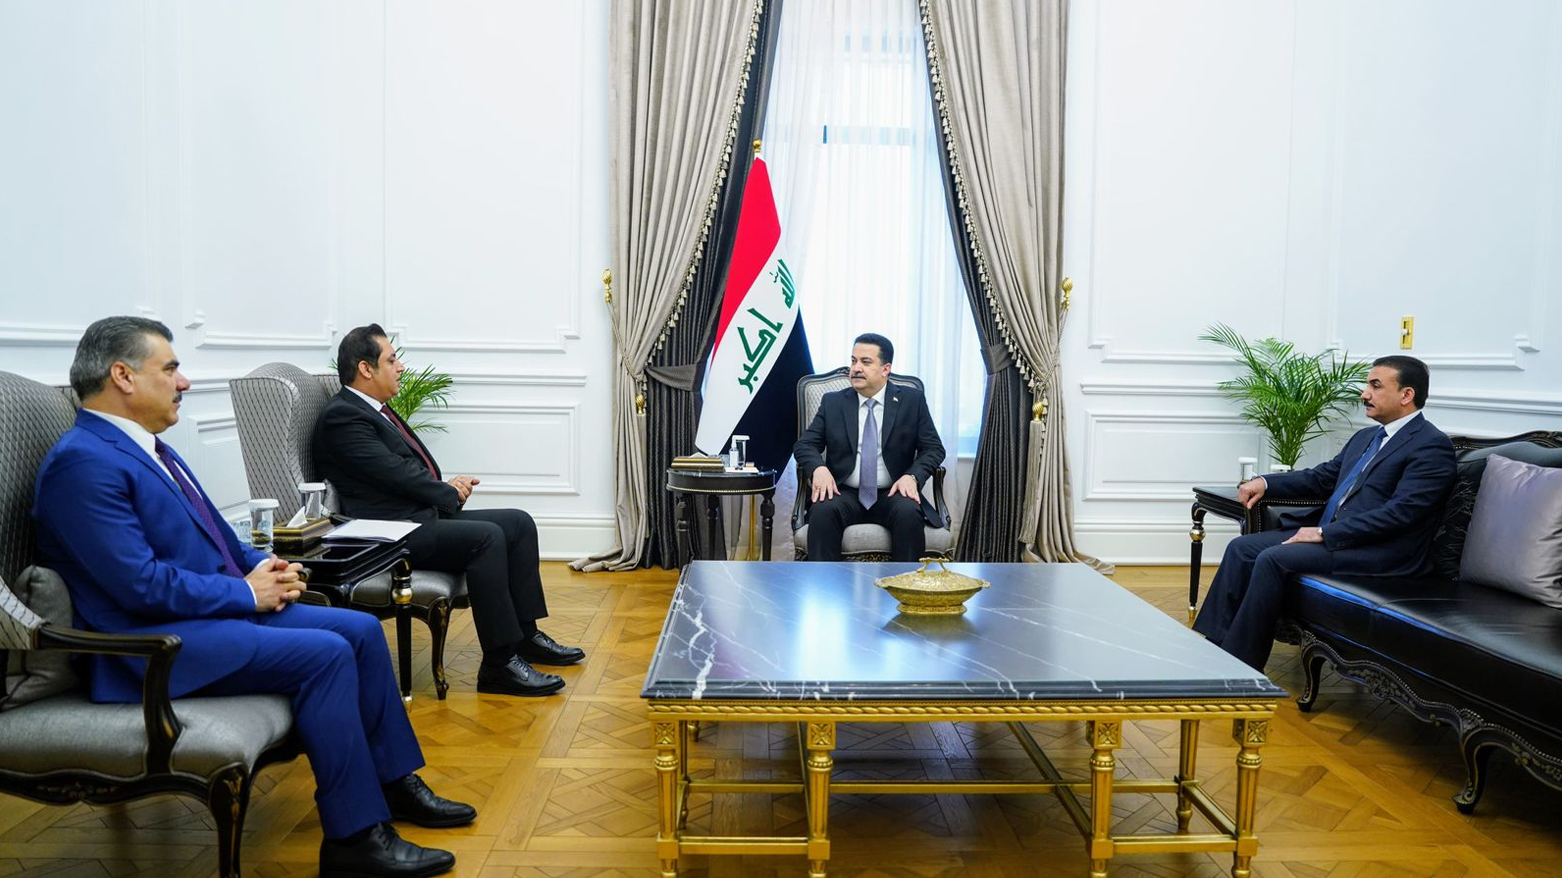 The meeting between the Iraq's Prime Minister al-Sudani with KRG's Education Minister Alan Hama Saeed & Federal Minister of Education Ibrahim Namis Al-Jubouri. (Photo: Iraqi Government)